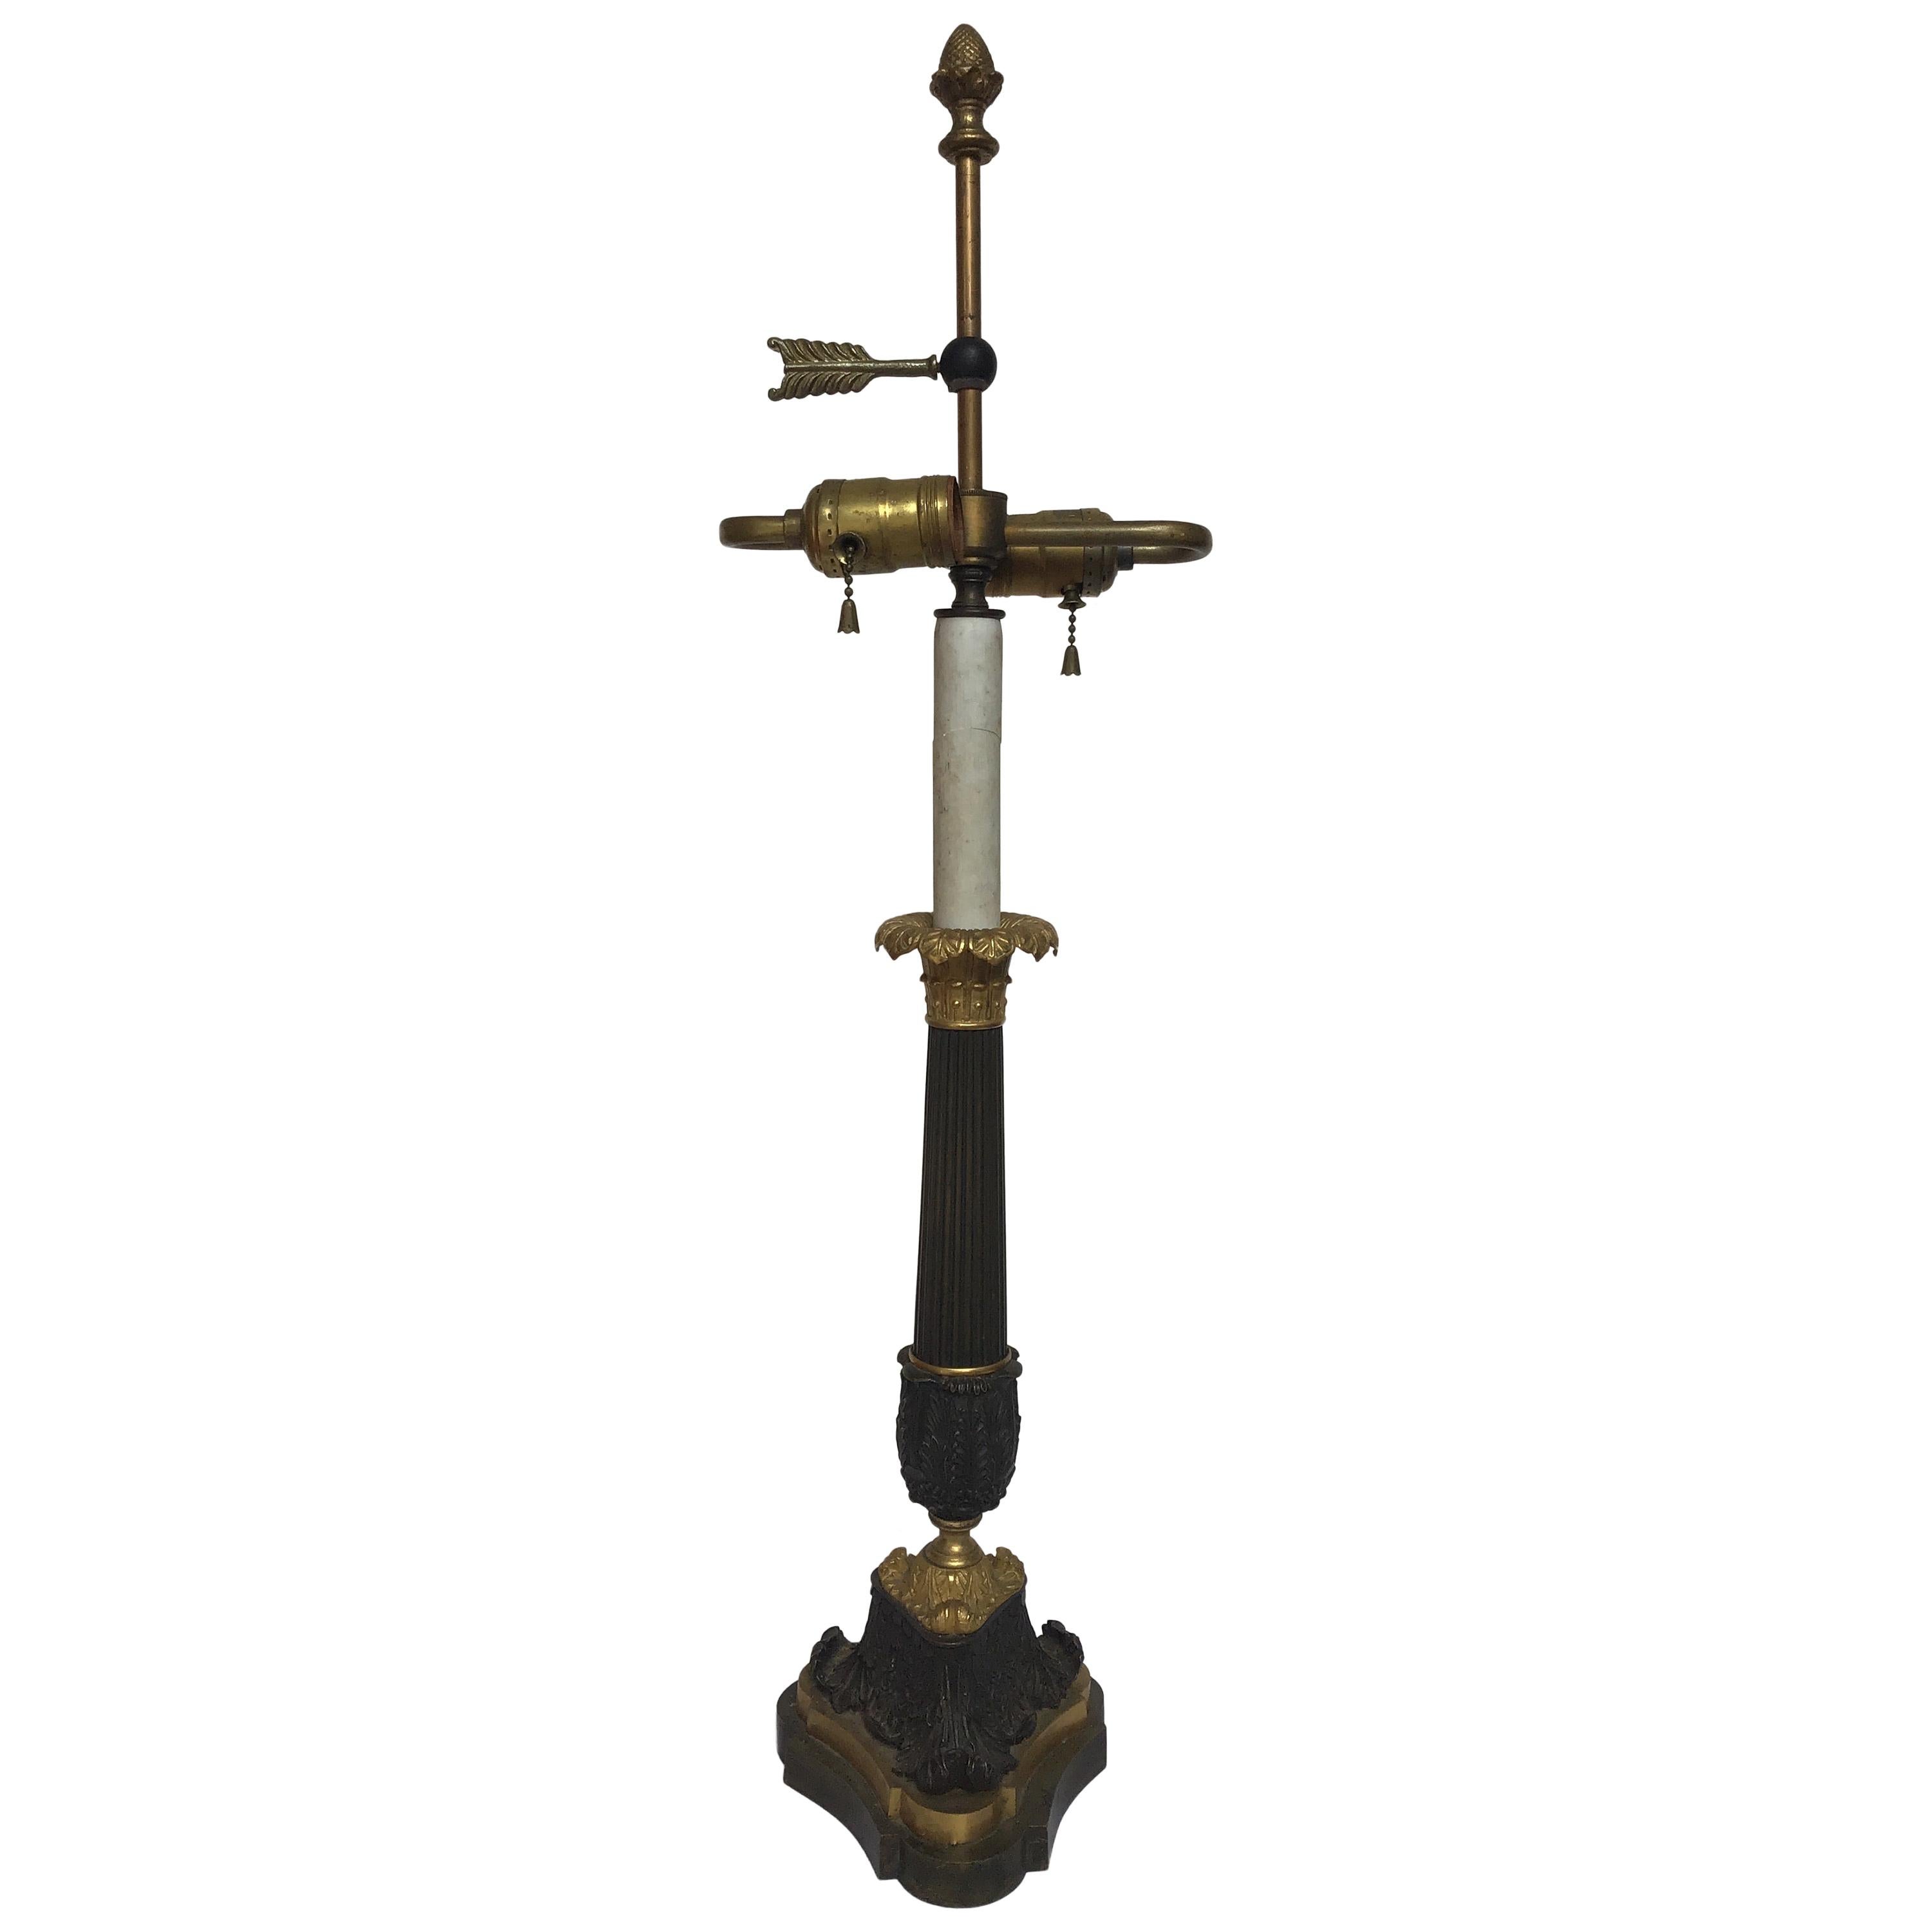 1880s French Empire Gilt Bronze Candlestick Lamp For Sale